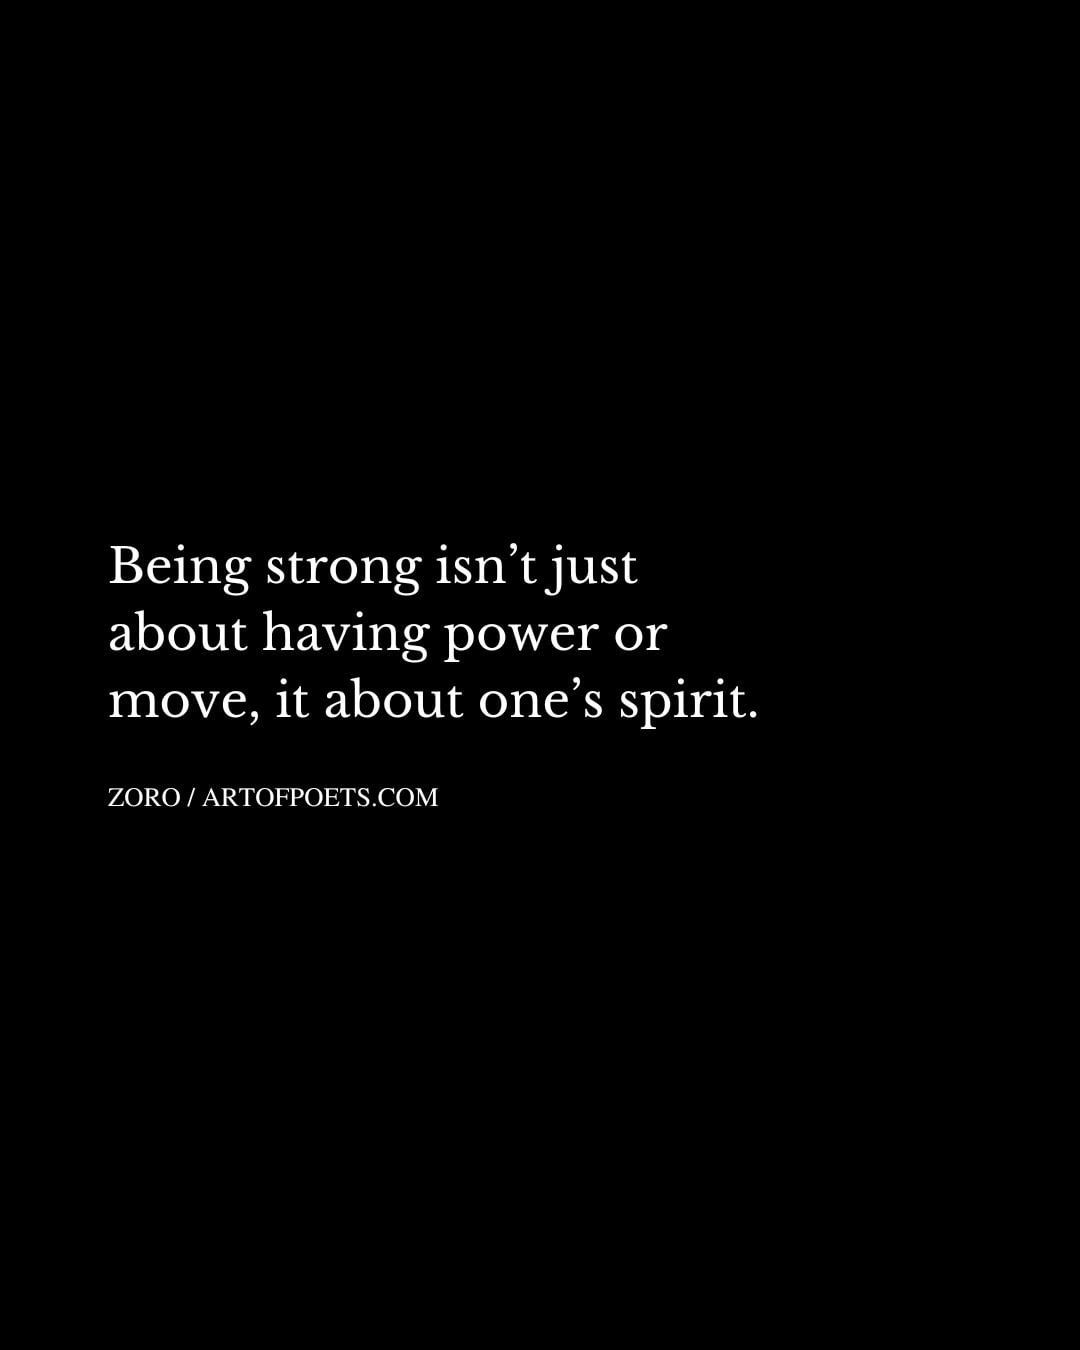 Being strong isnt just about having power or move it about ones spirit